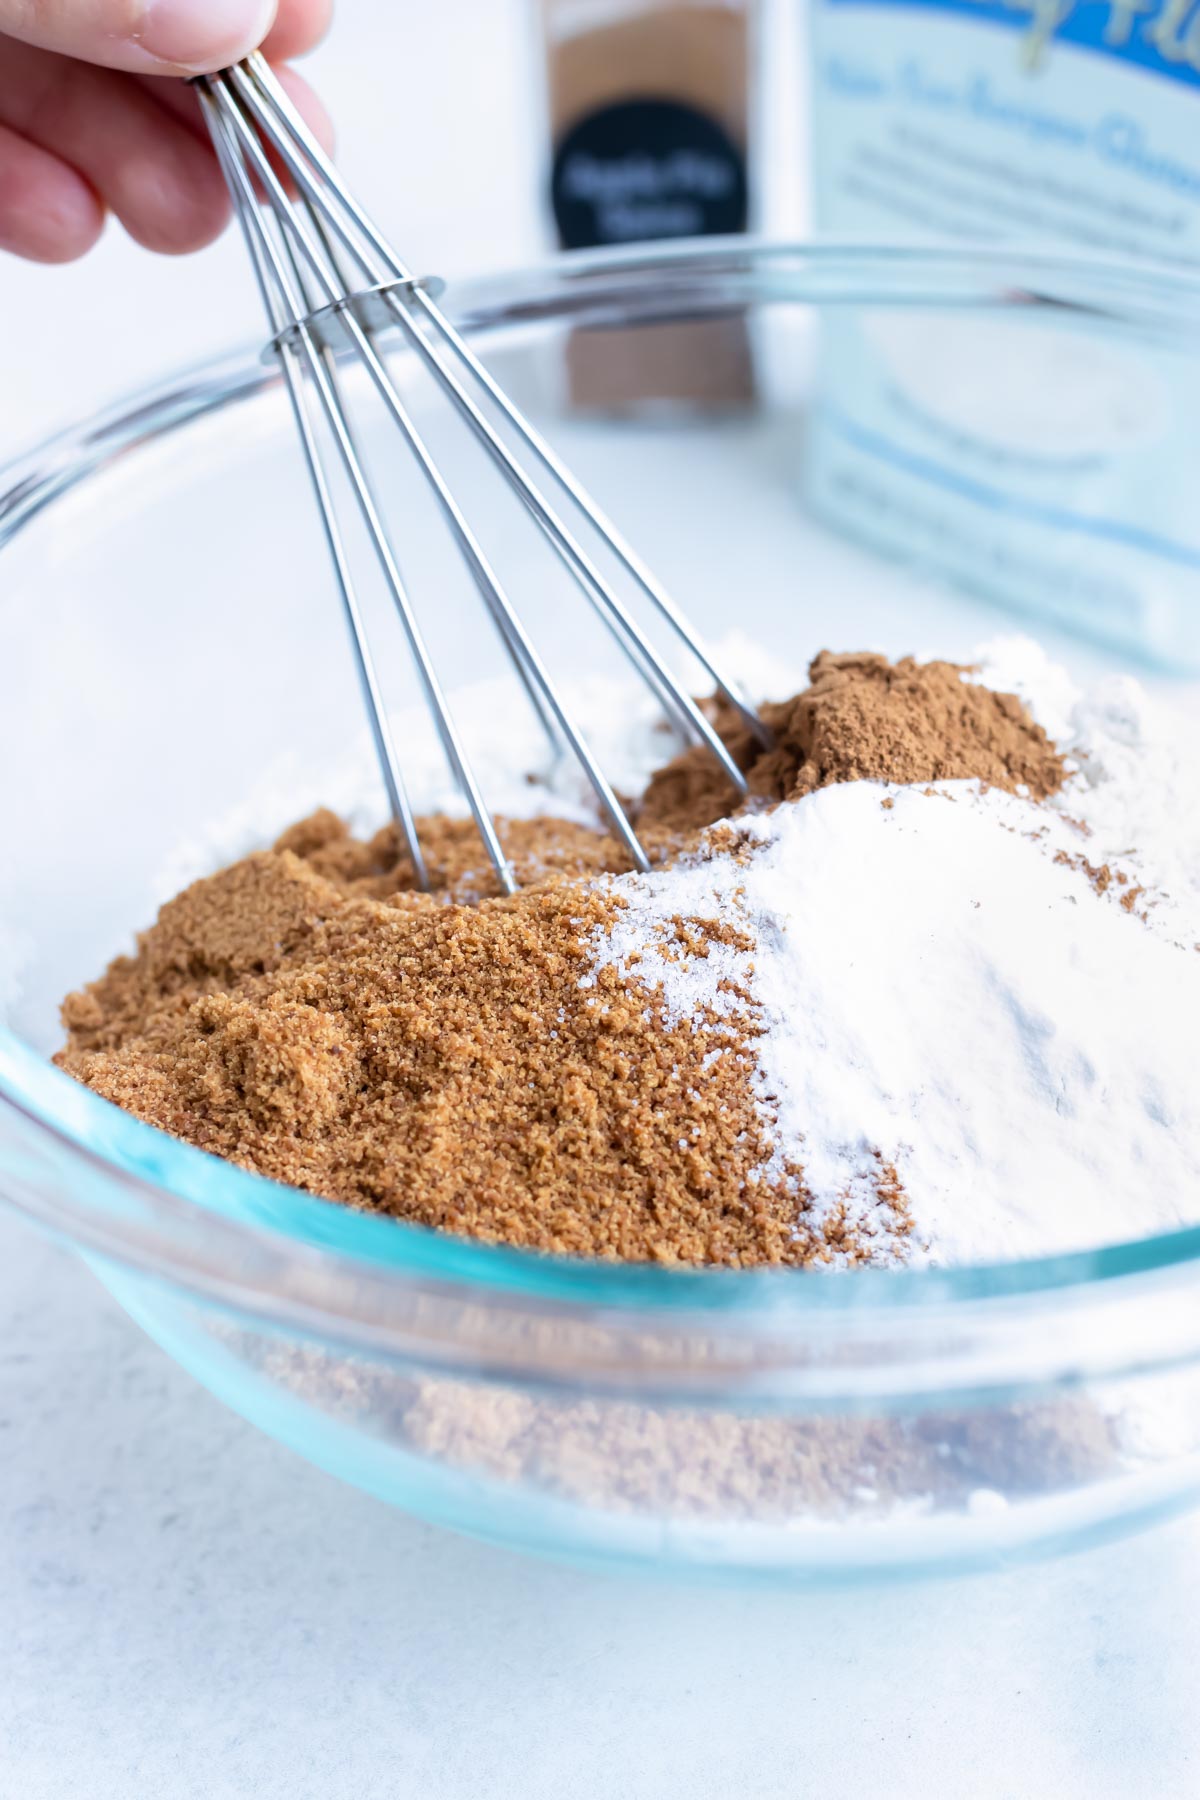 Flour, sugar, and spices are mixed in a glass bowl.